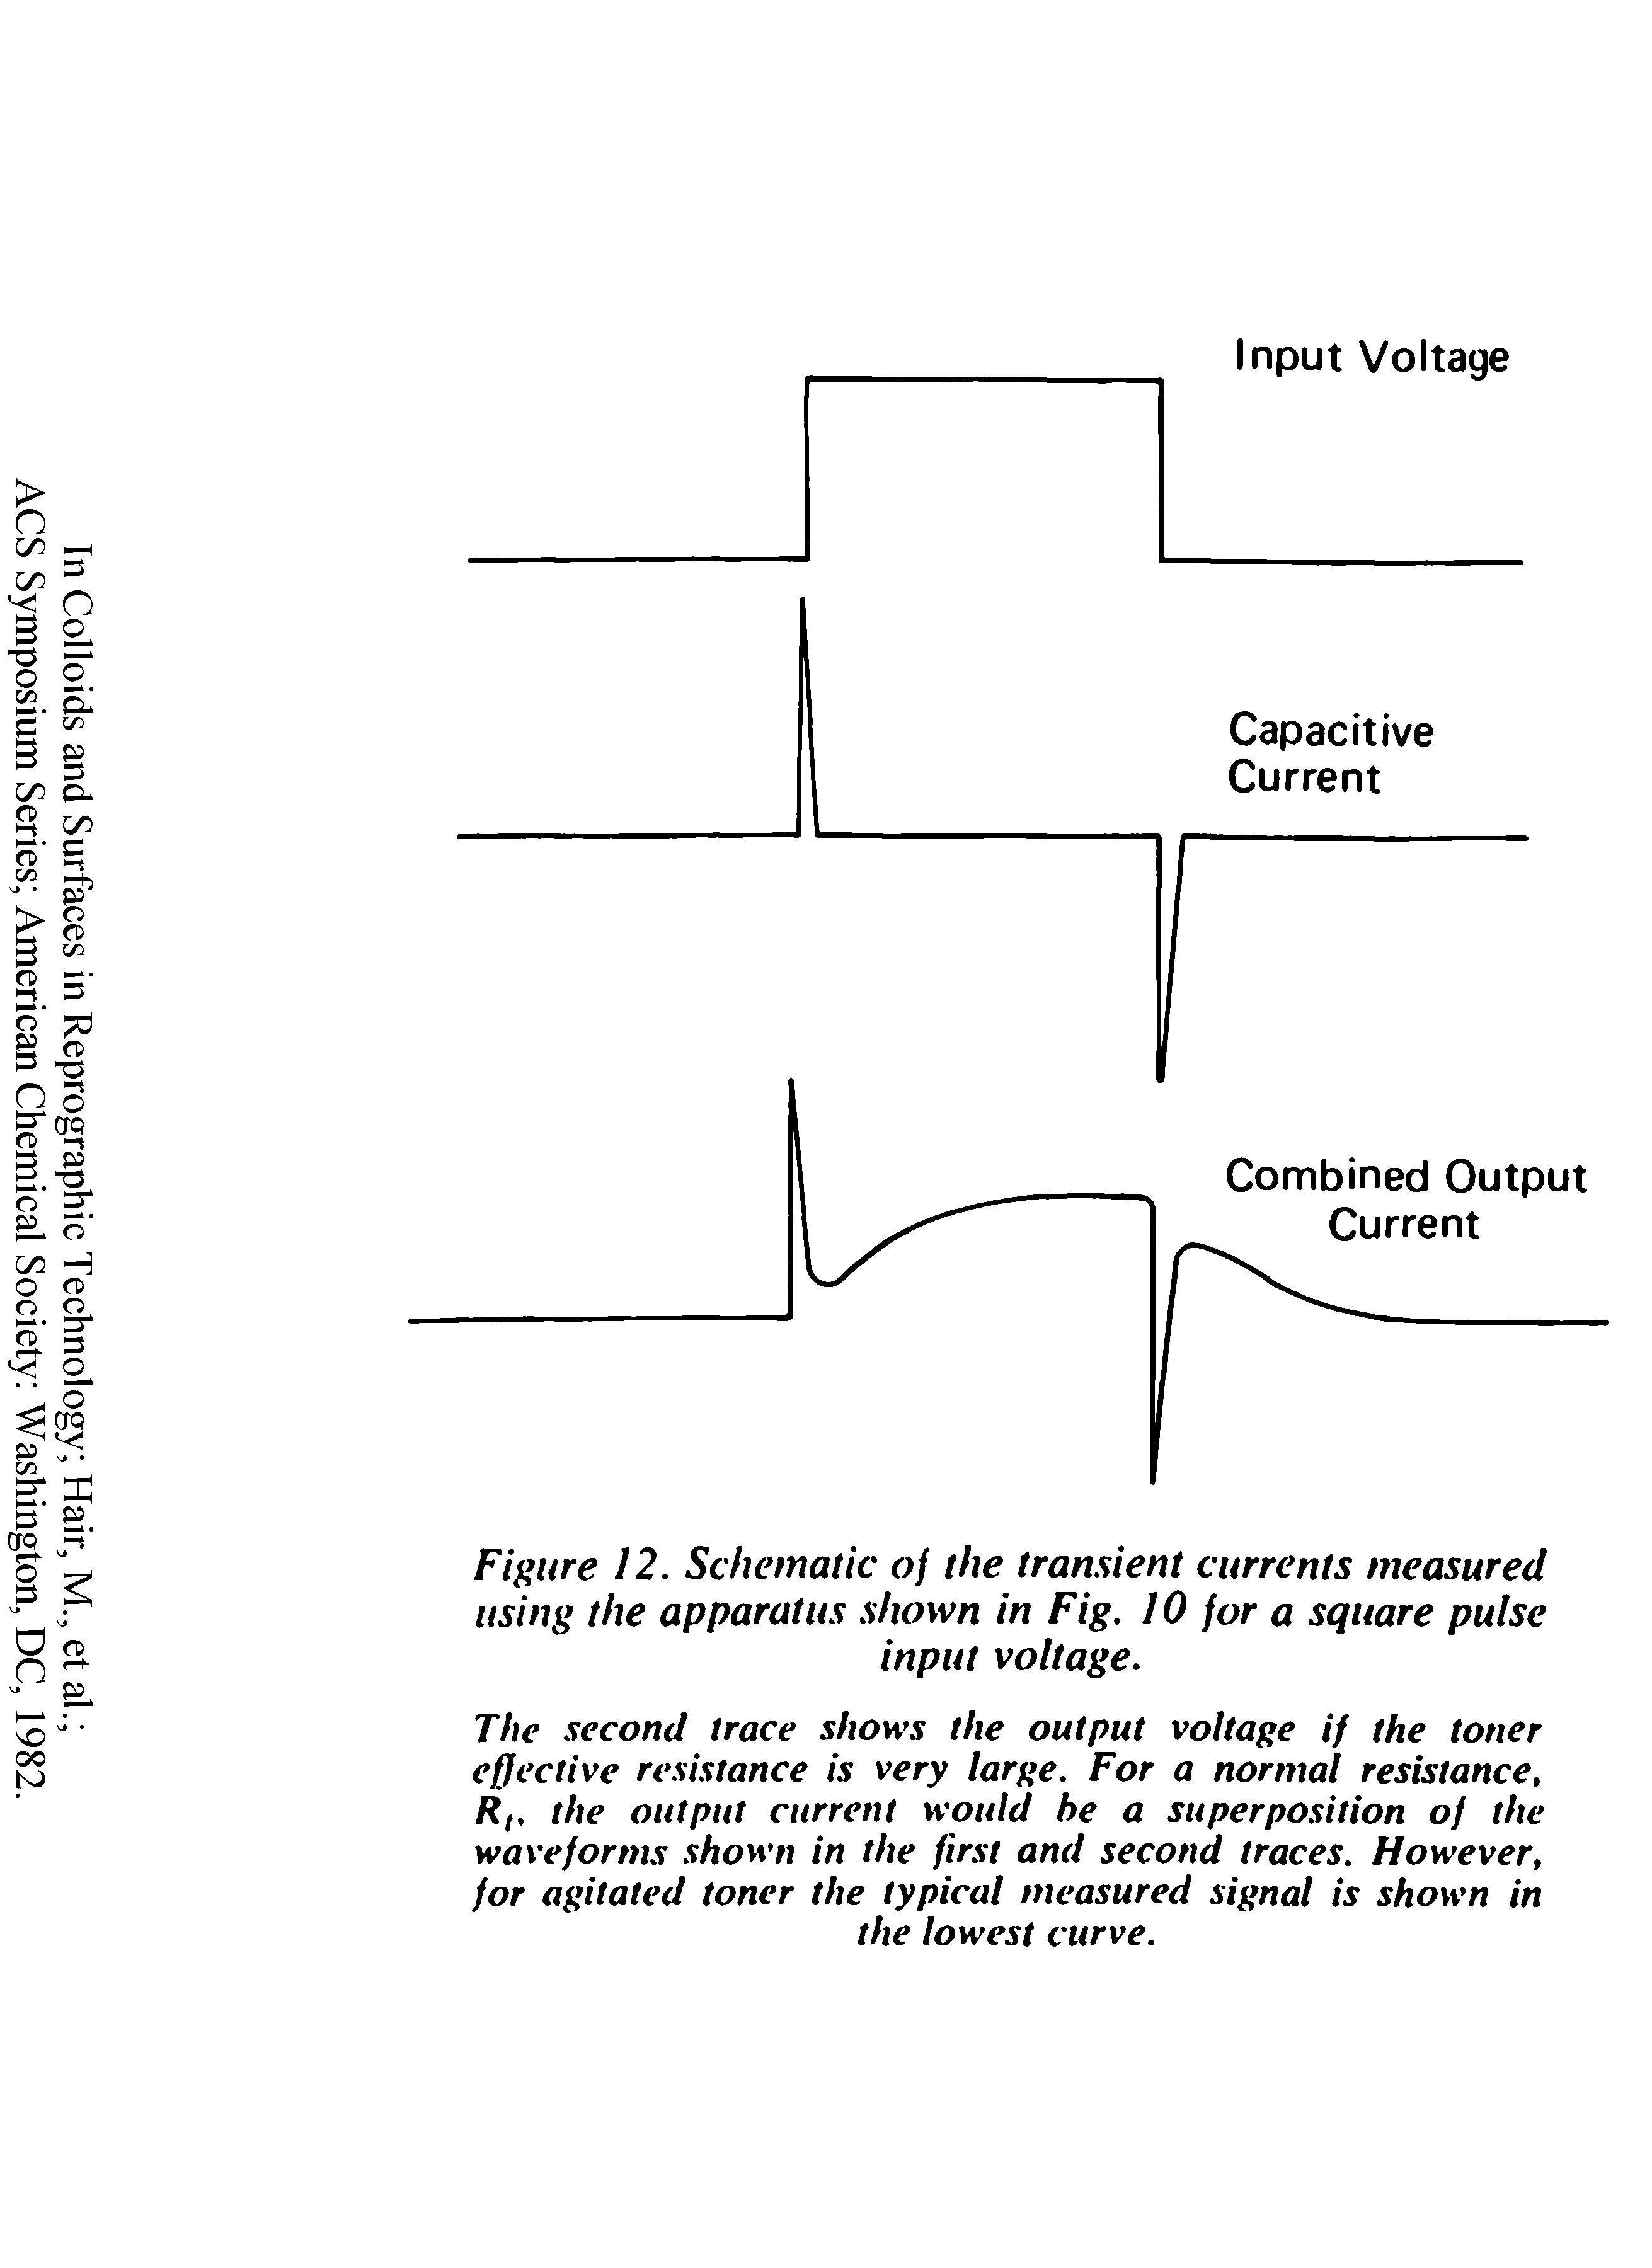 Figure 12. Schematic of the transient currents measured using the apparatus shown in Fig. 10 for a square pulse input voltage.